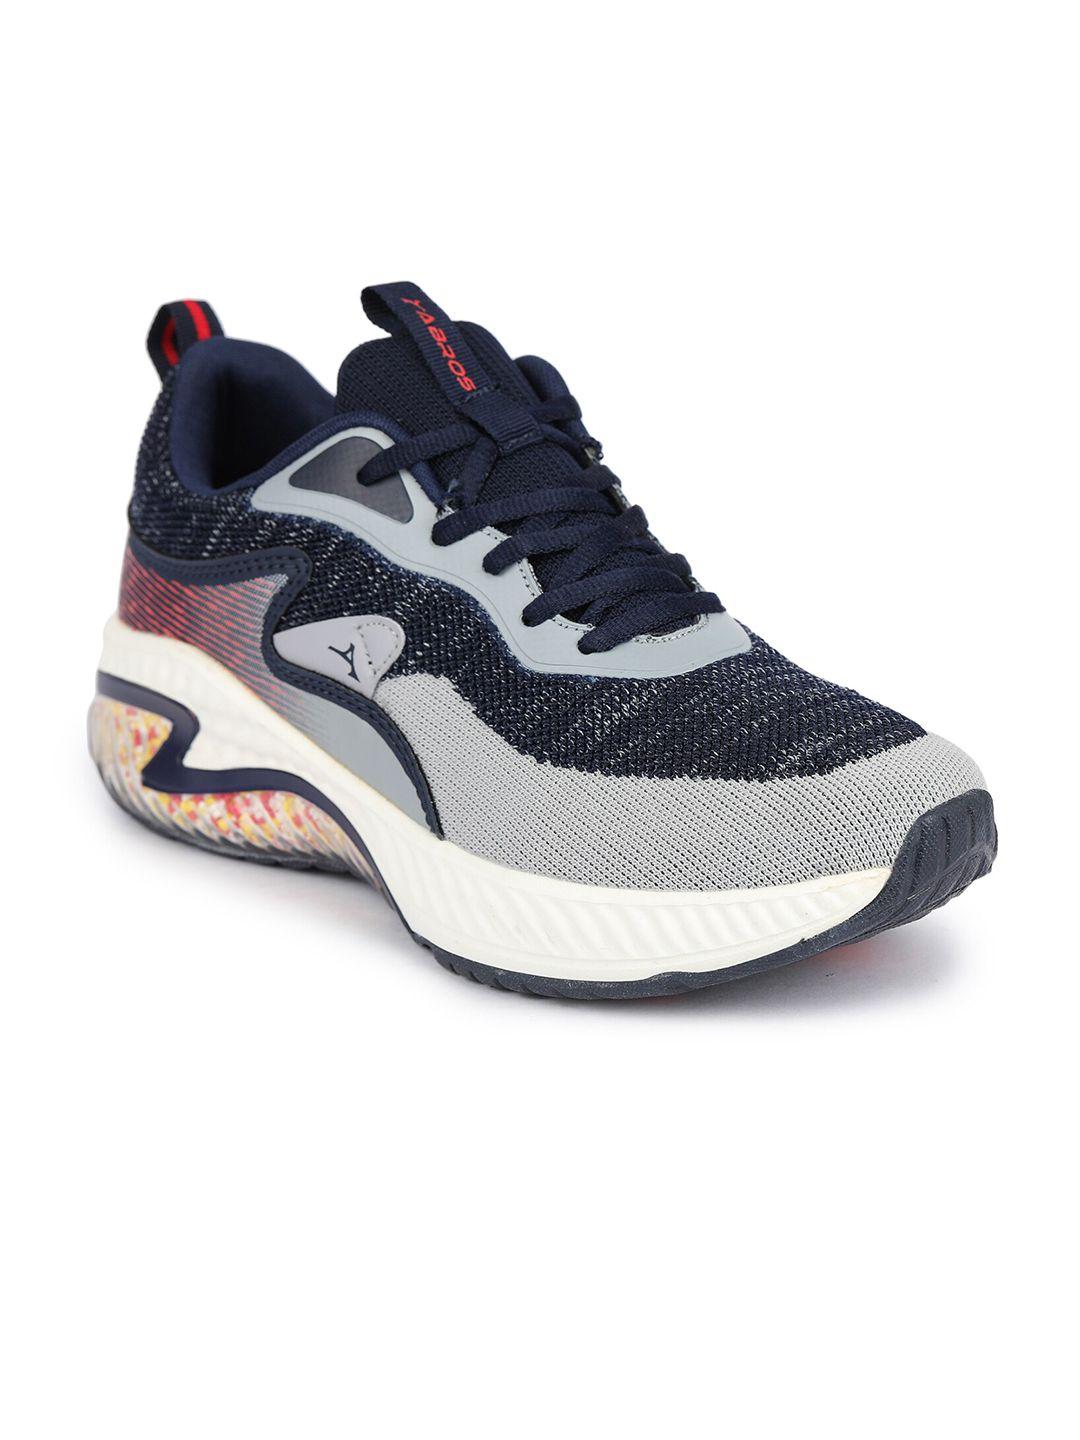 abros-men-navy-blue-mesh-all-rounder-running-shoes-with-air-technology